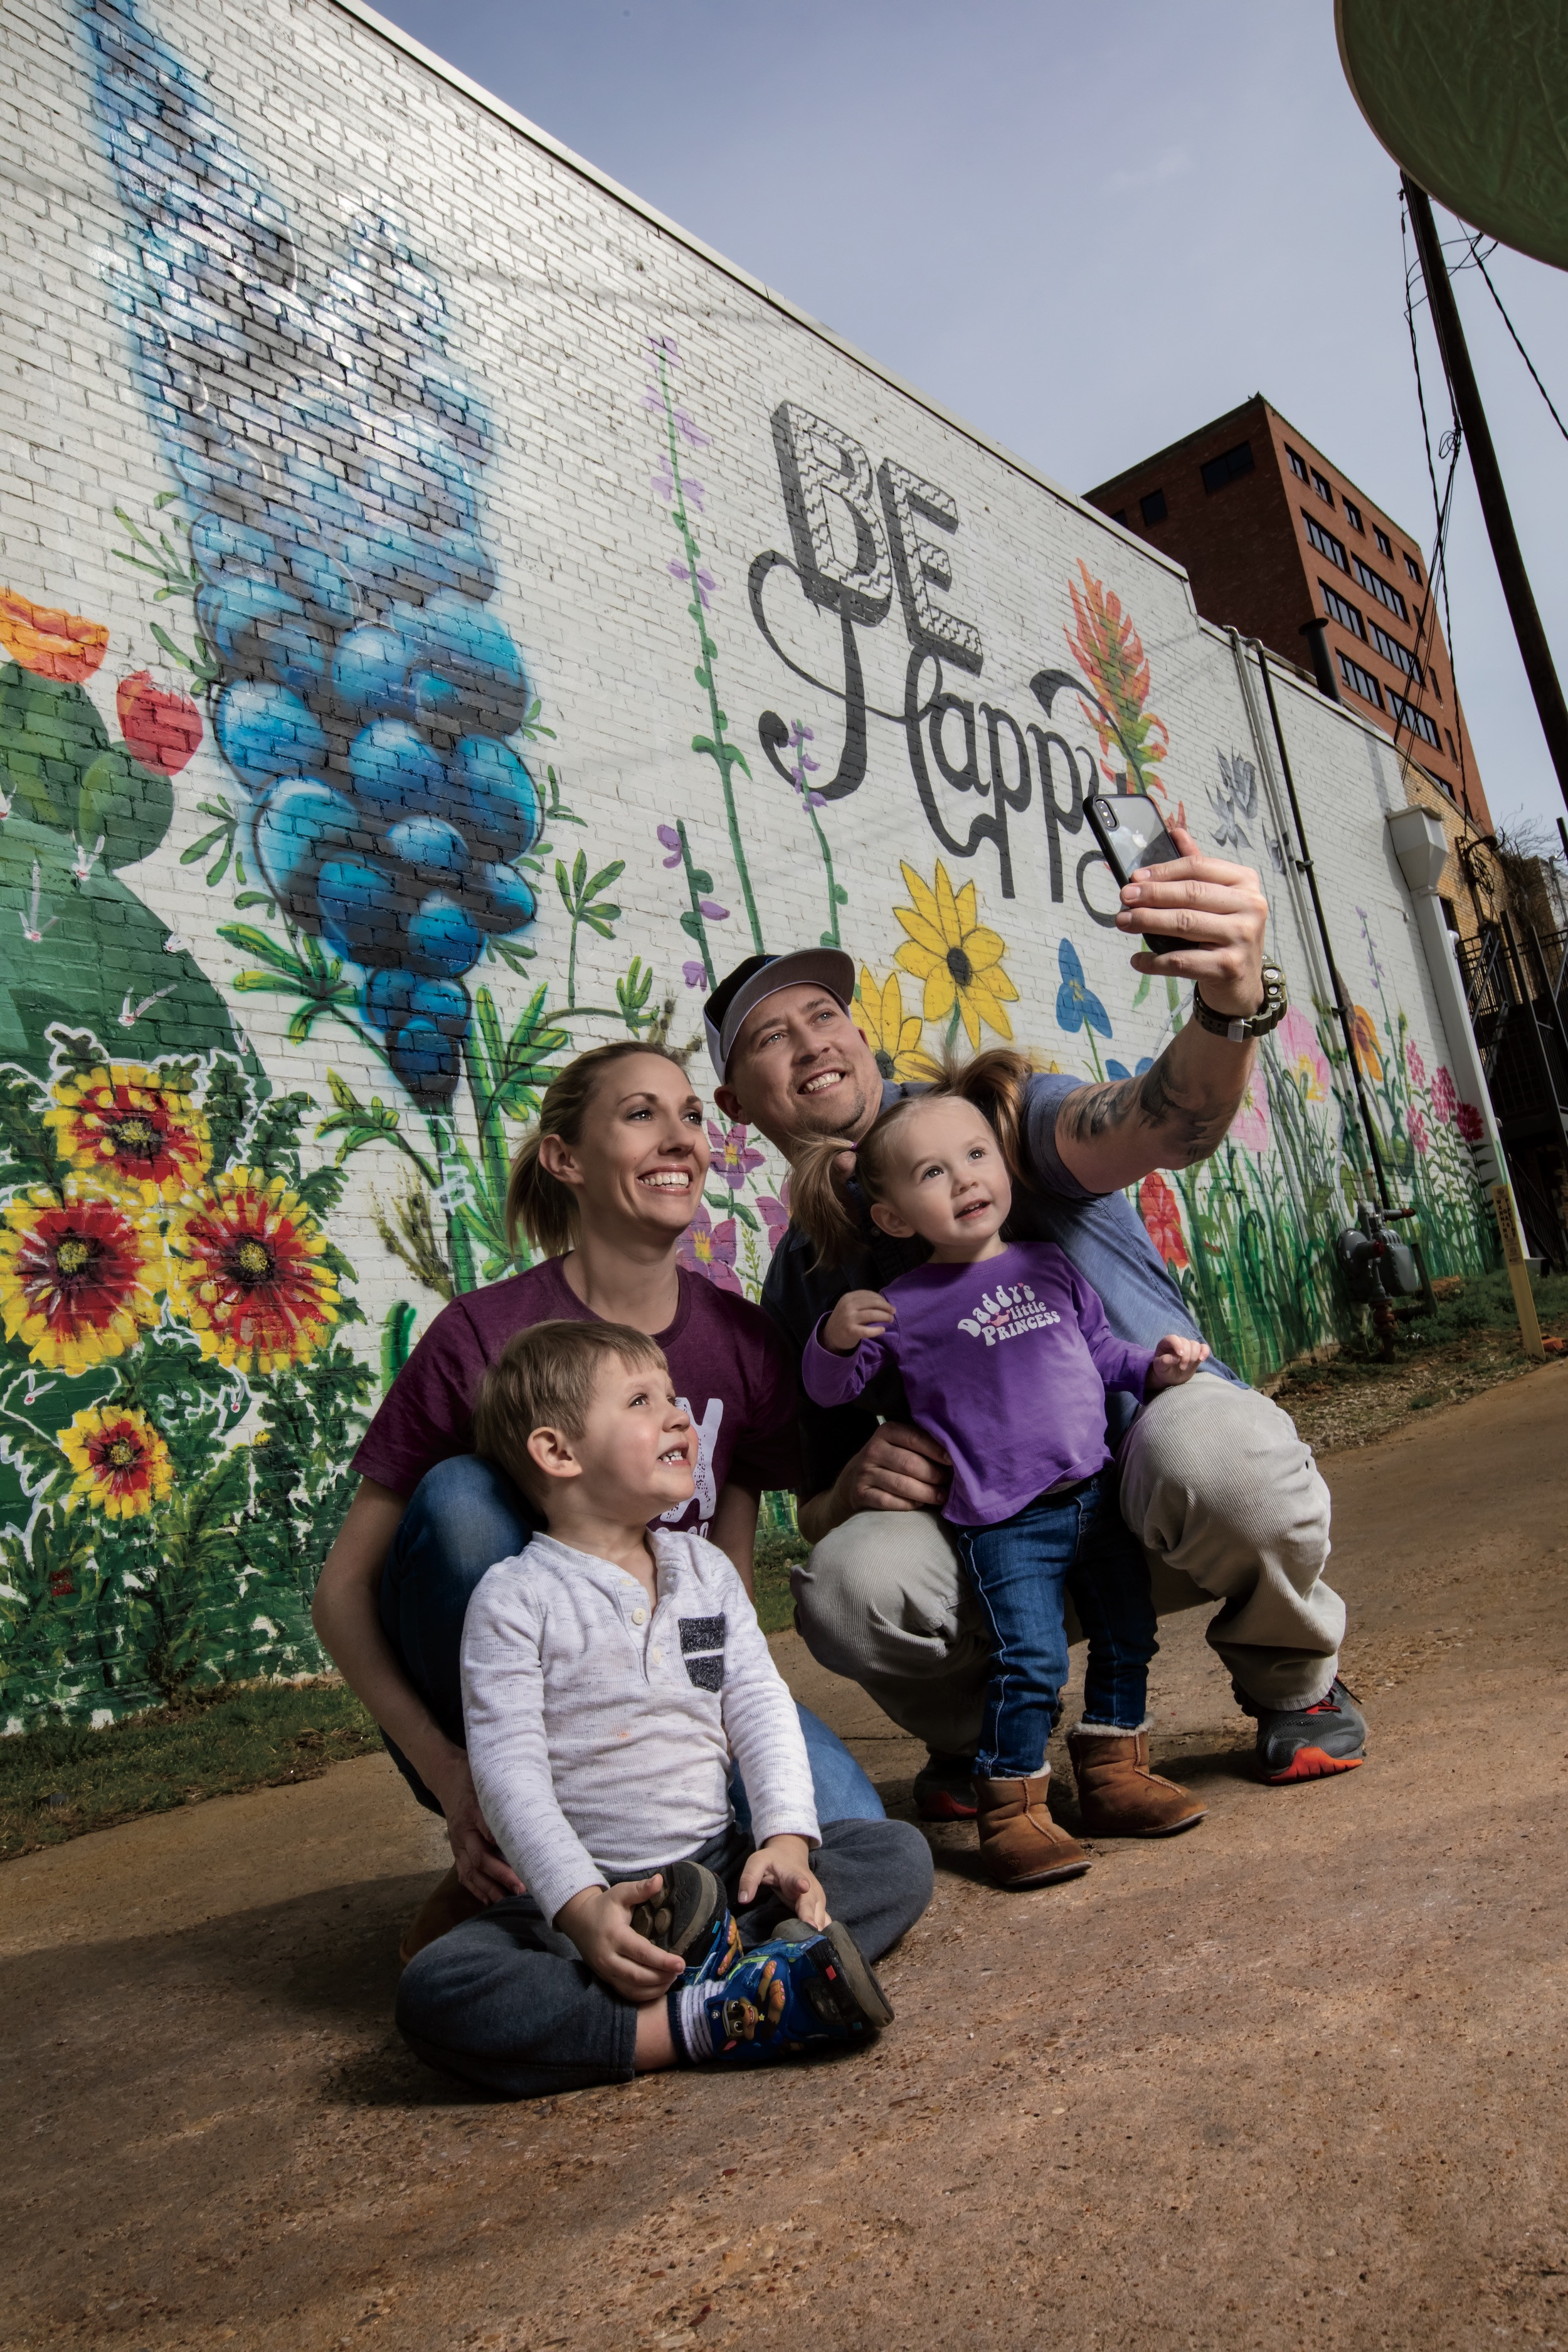 family taking a photo in front of a mural that reads "be happy"